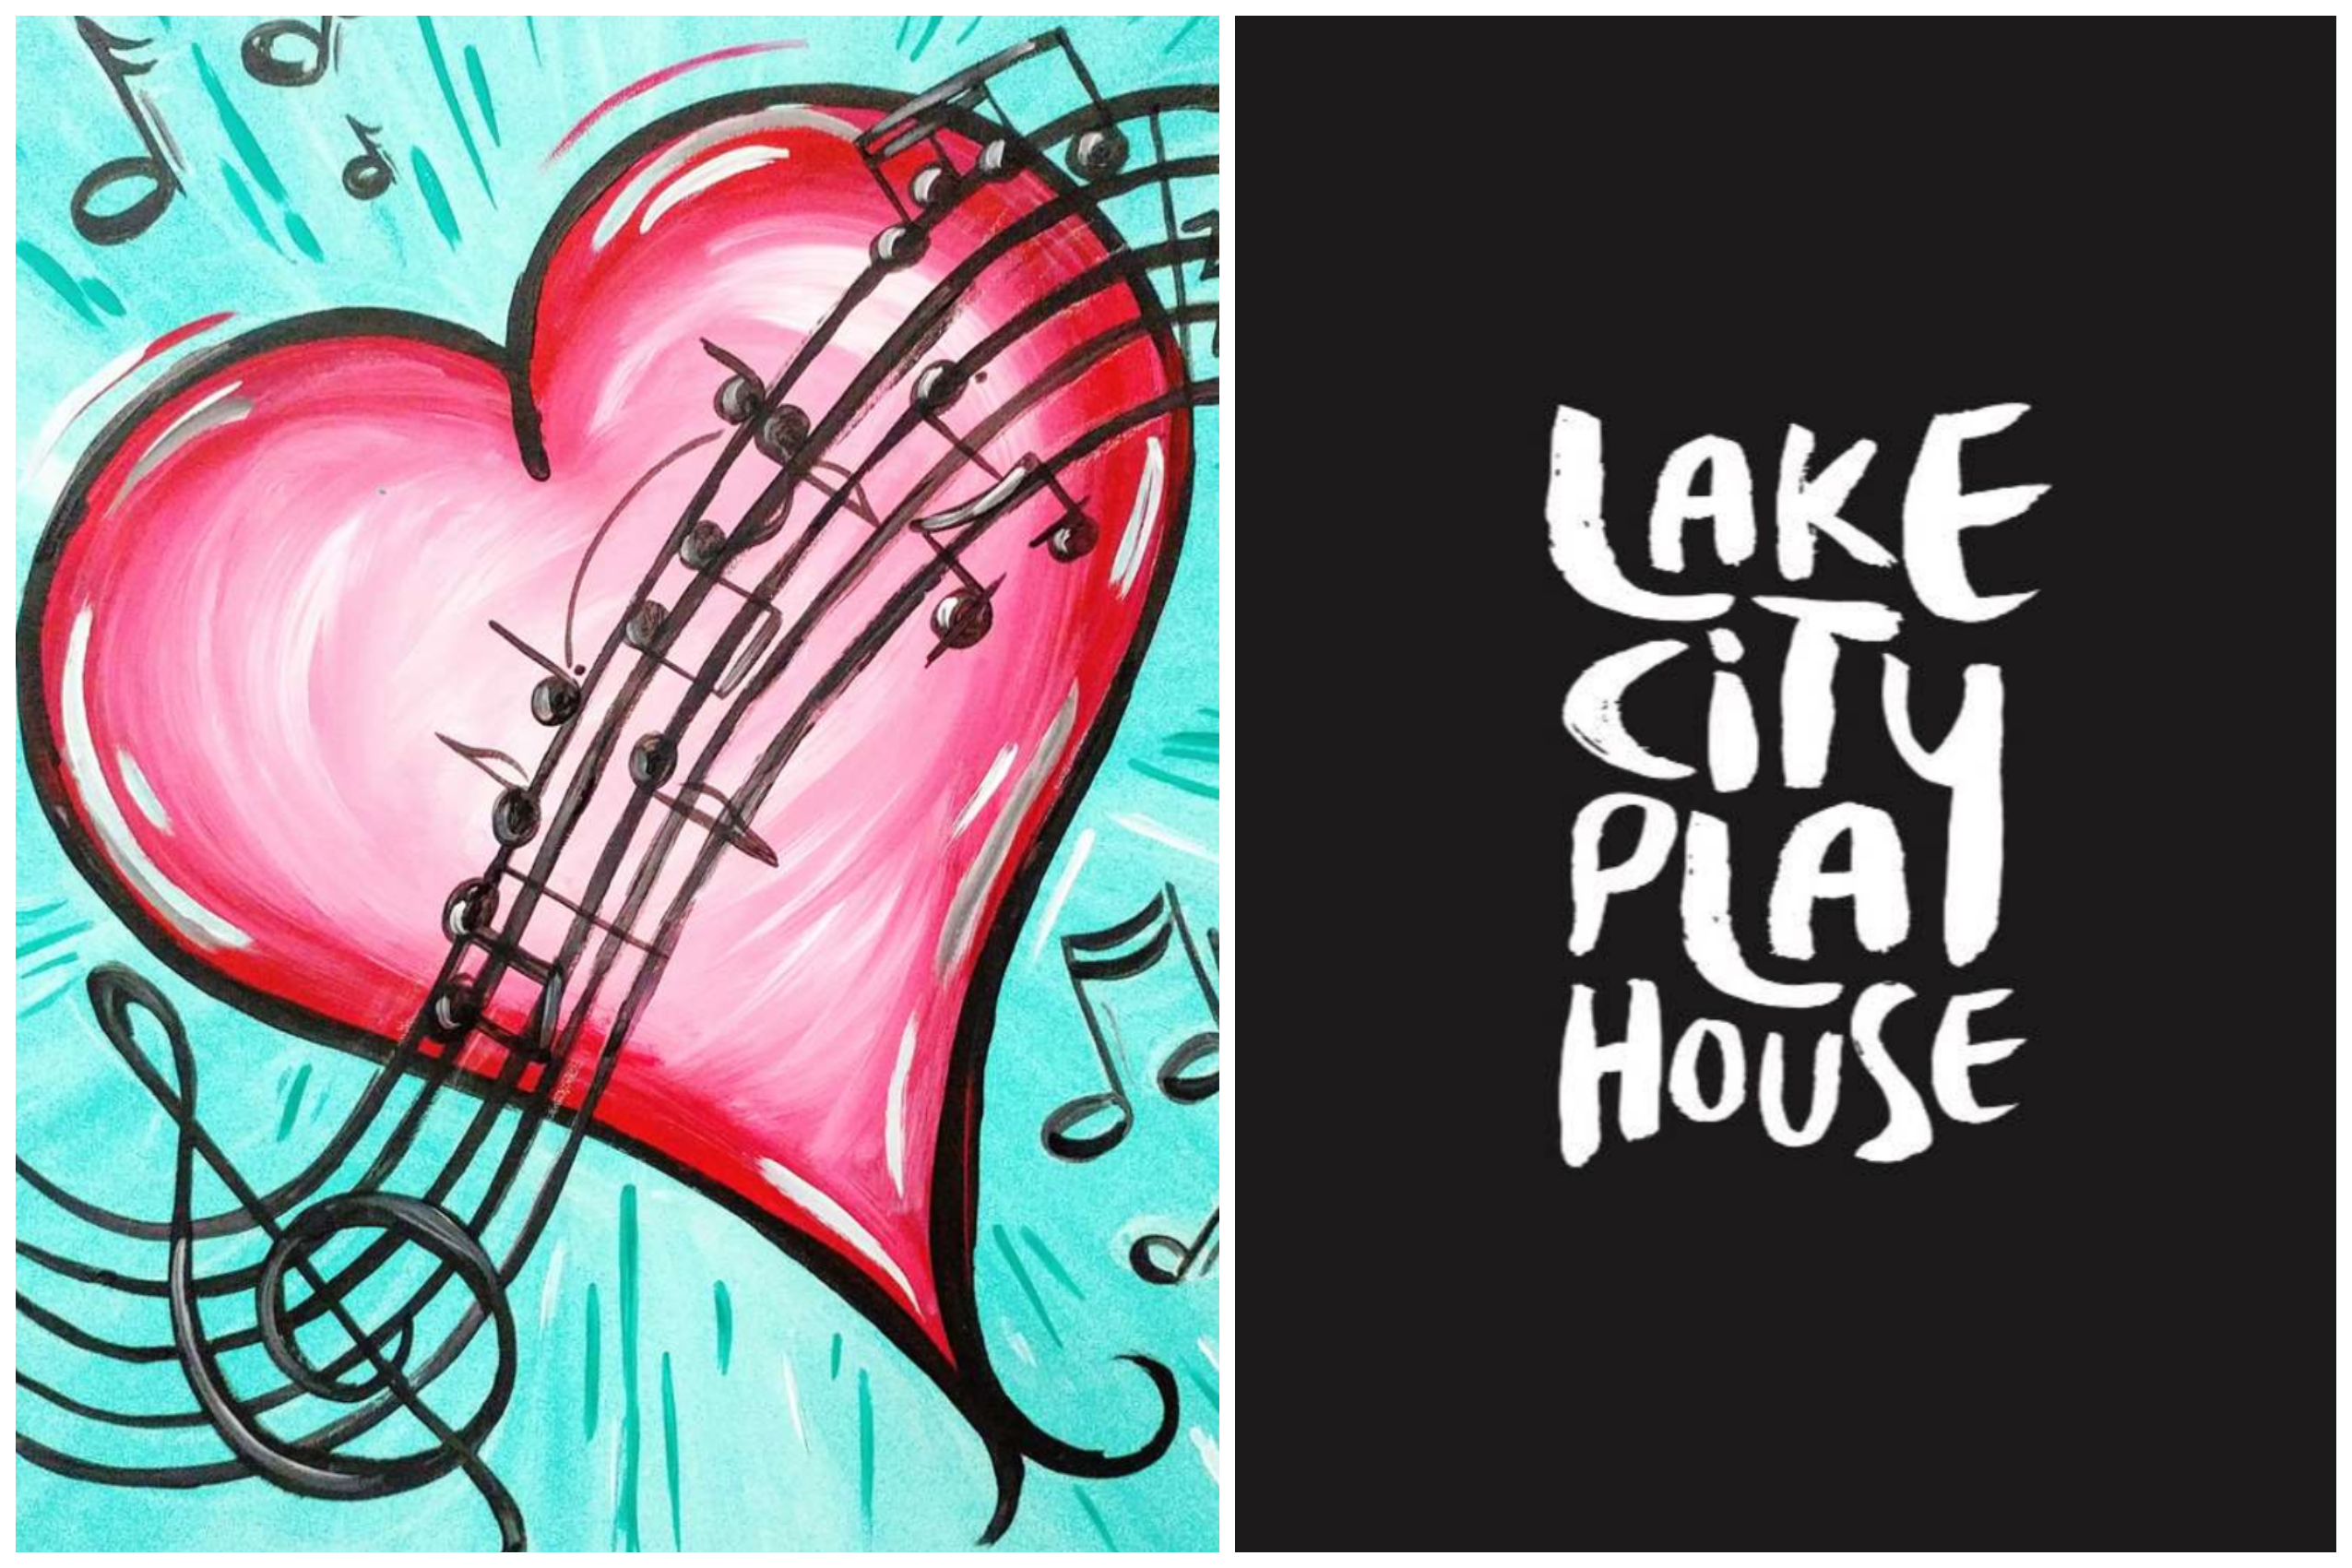 Paint it Forward with Lake City Playhouse!